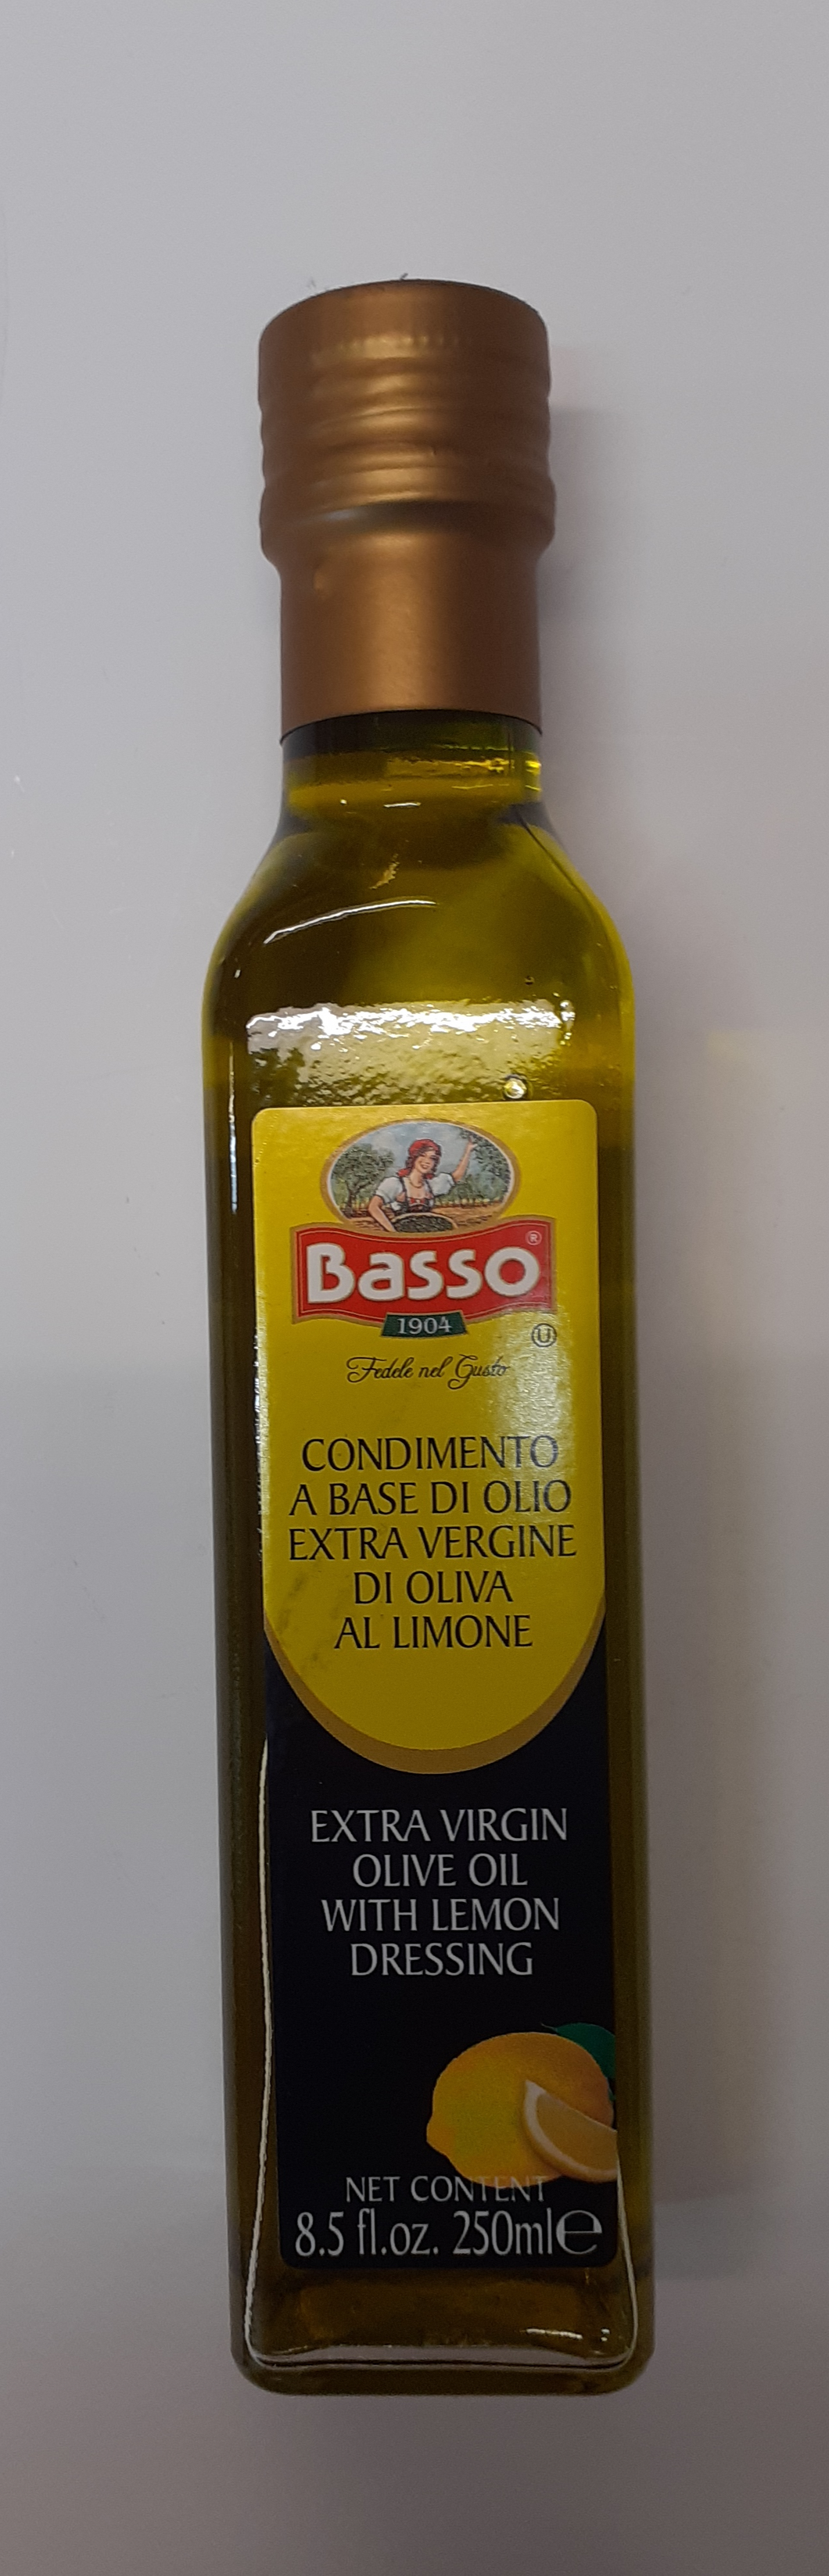 Basso - Extra Virgin Olive Oil with Lemon